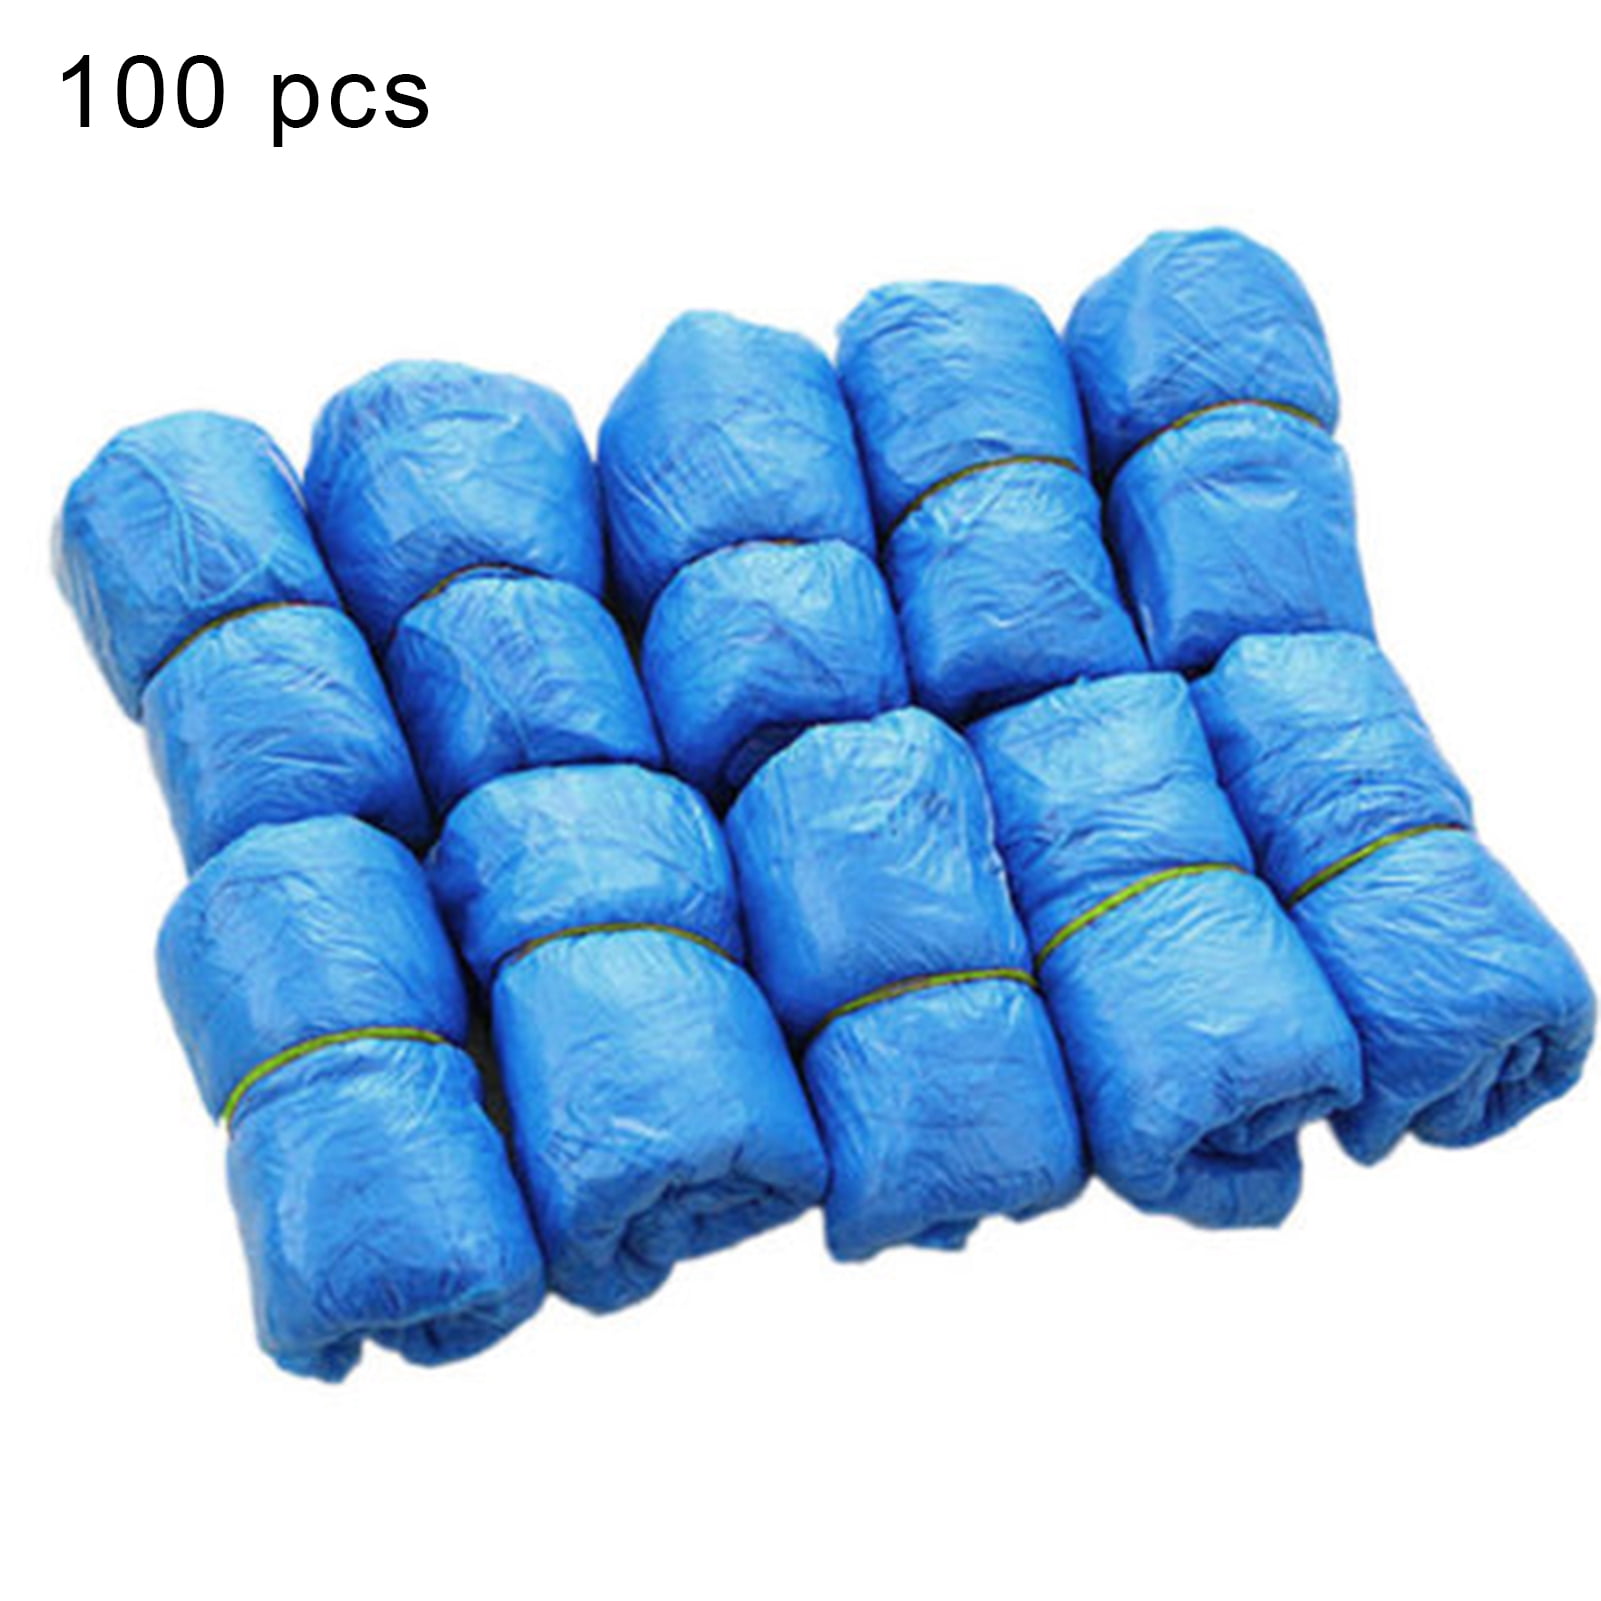 100x Waterproof Boot Shoe Cover Plastic Disposable Overshoes Protector FAST SHIP 